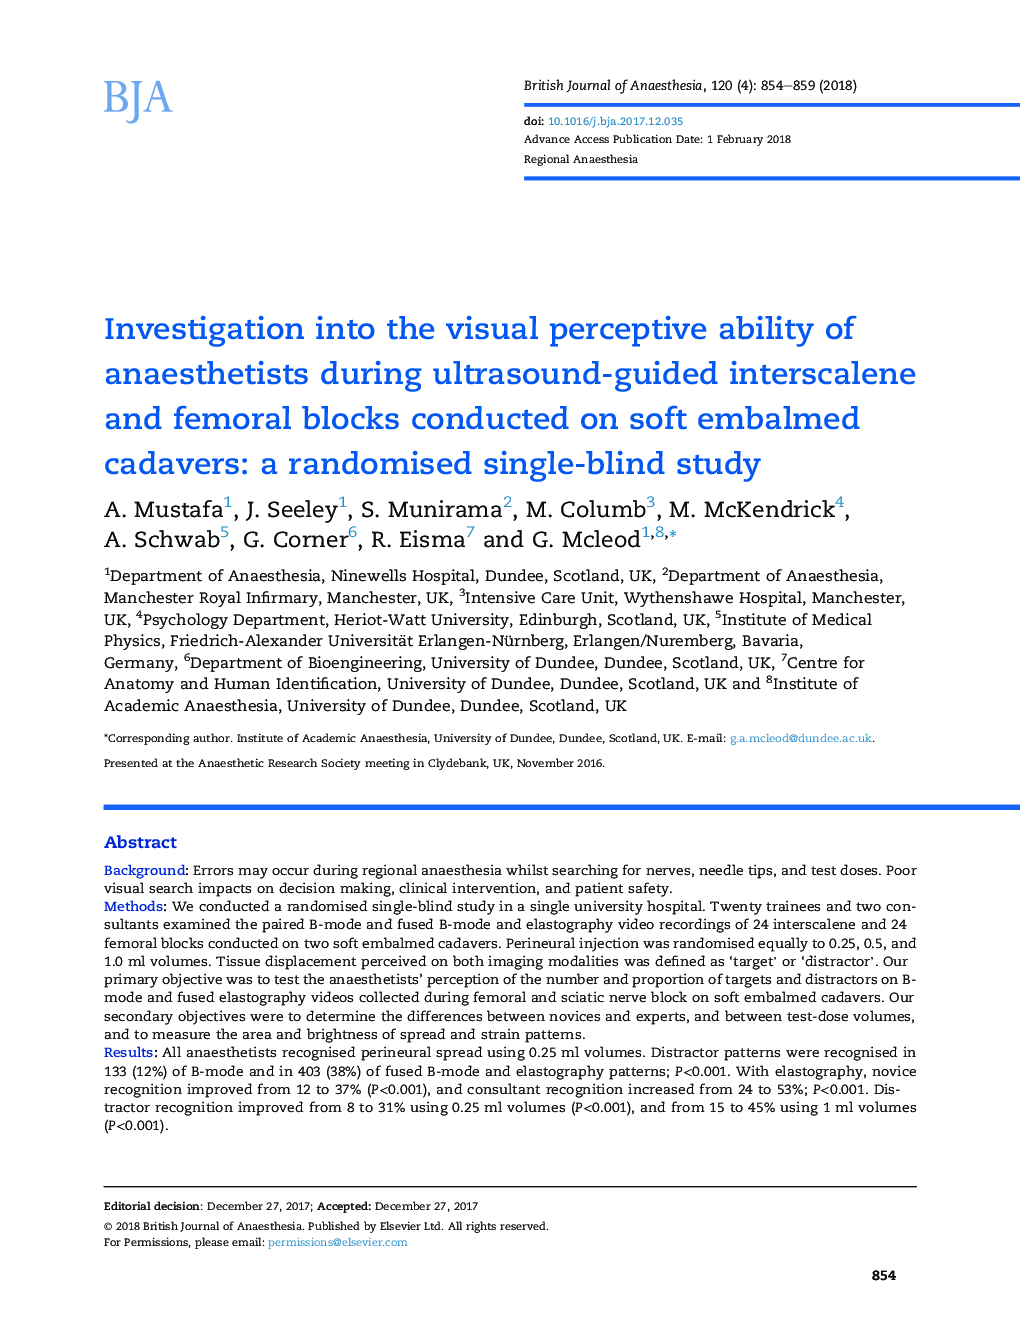 Investigation into the visual perceptive ability of anaesthetists during ultrasound-guided interscalene and femoral blocks conducted on soft embalmed cadavers: a randomised single-blind study